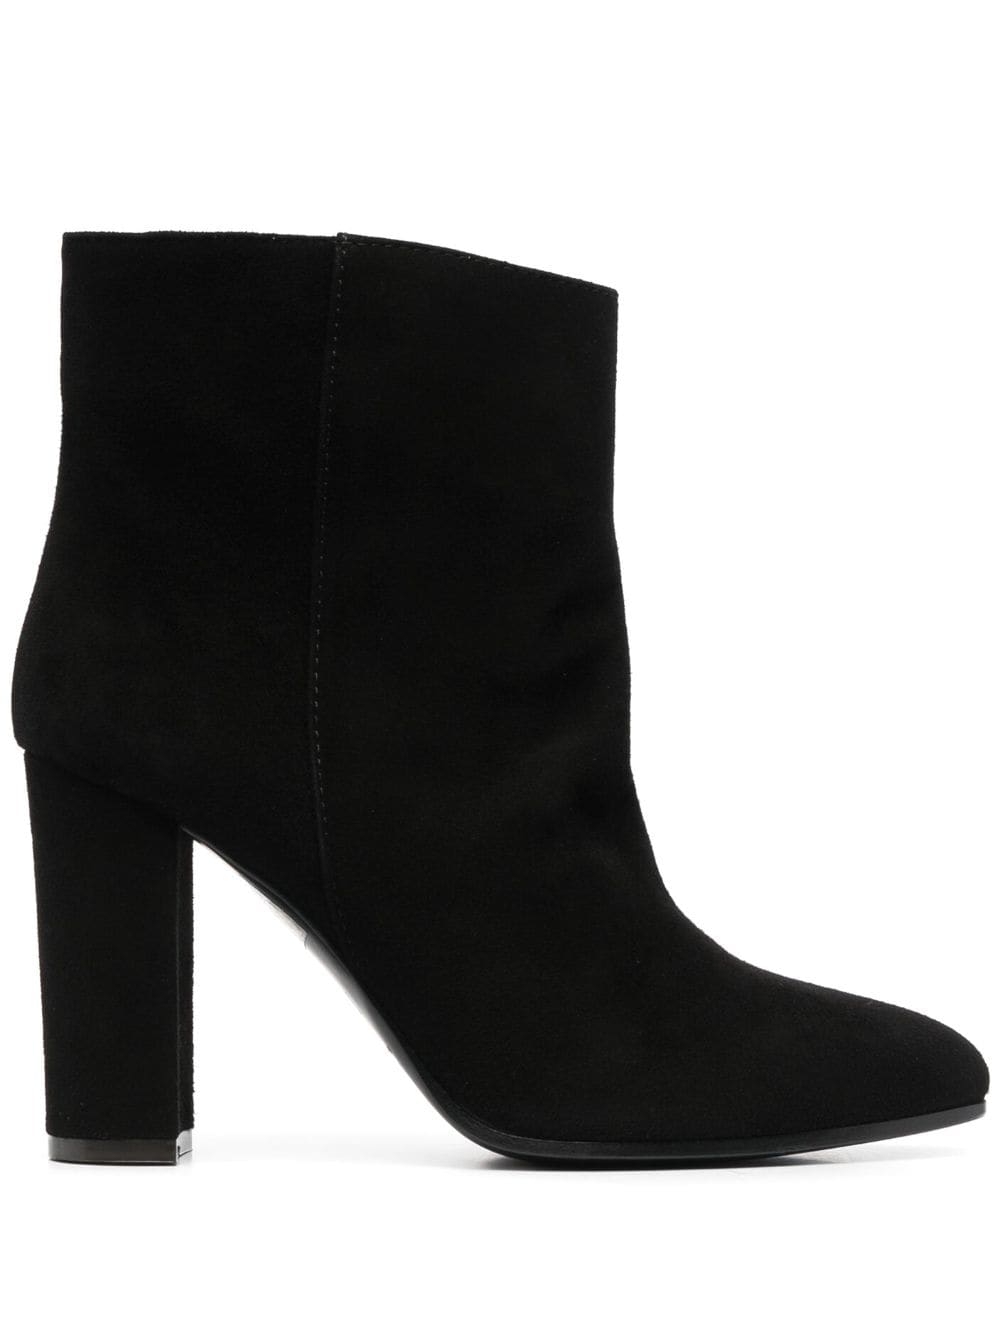 VIA ROMA 15 HIGH-HEELED SUEDE ANKLE BOOTS